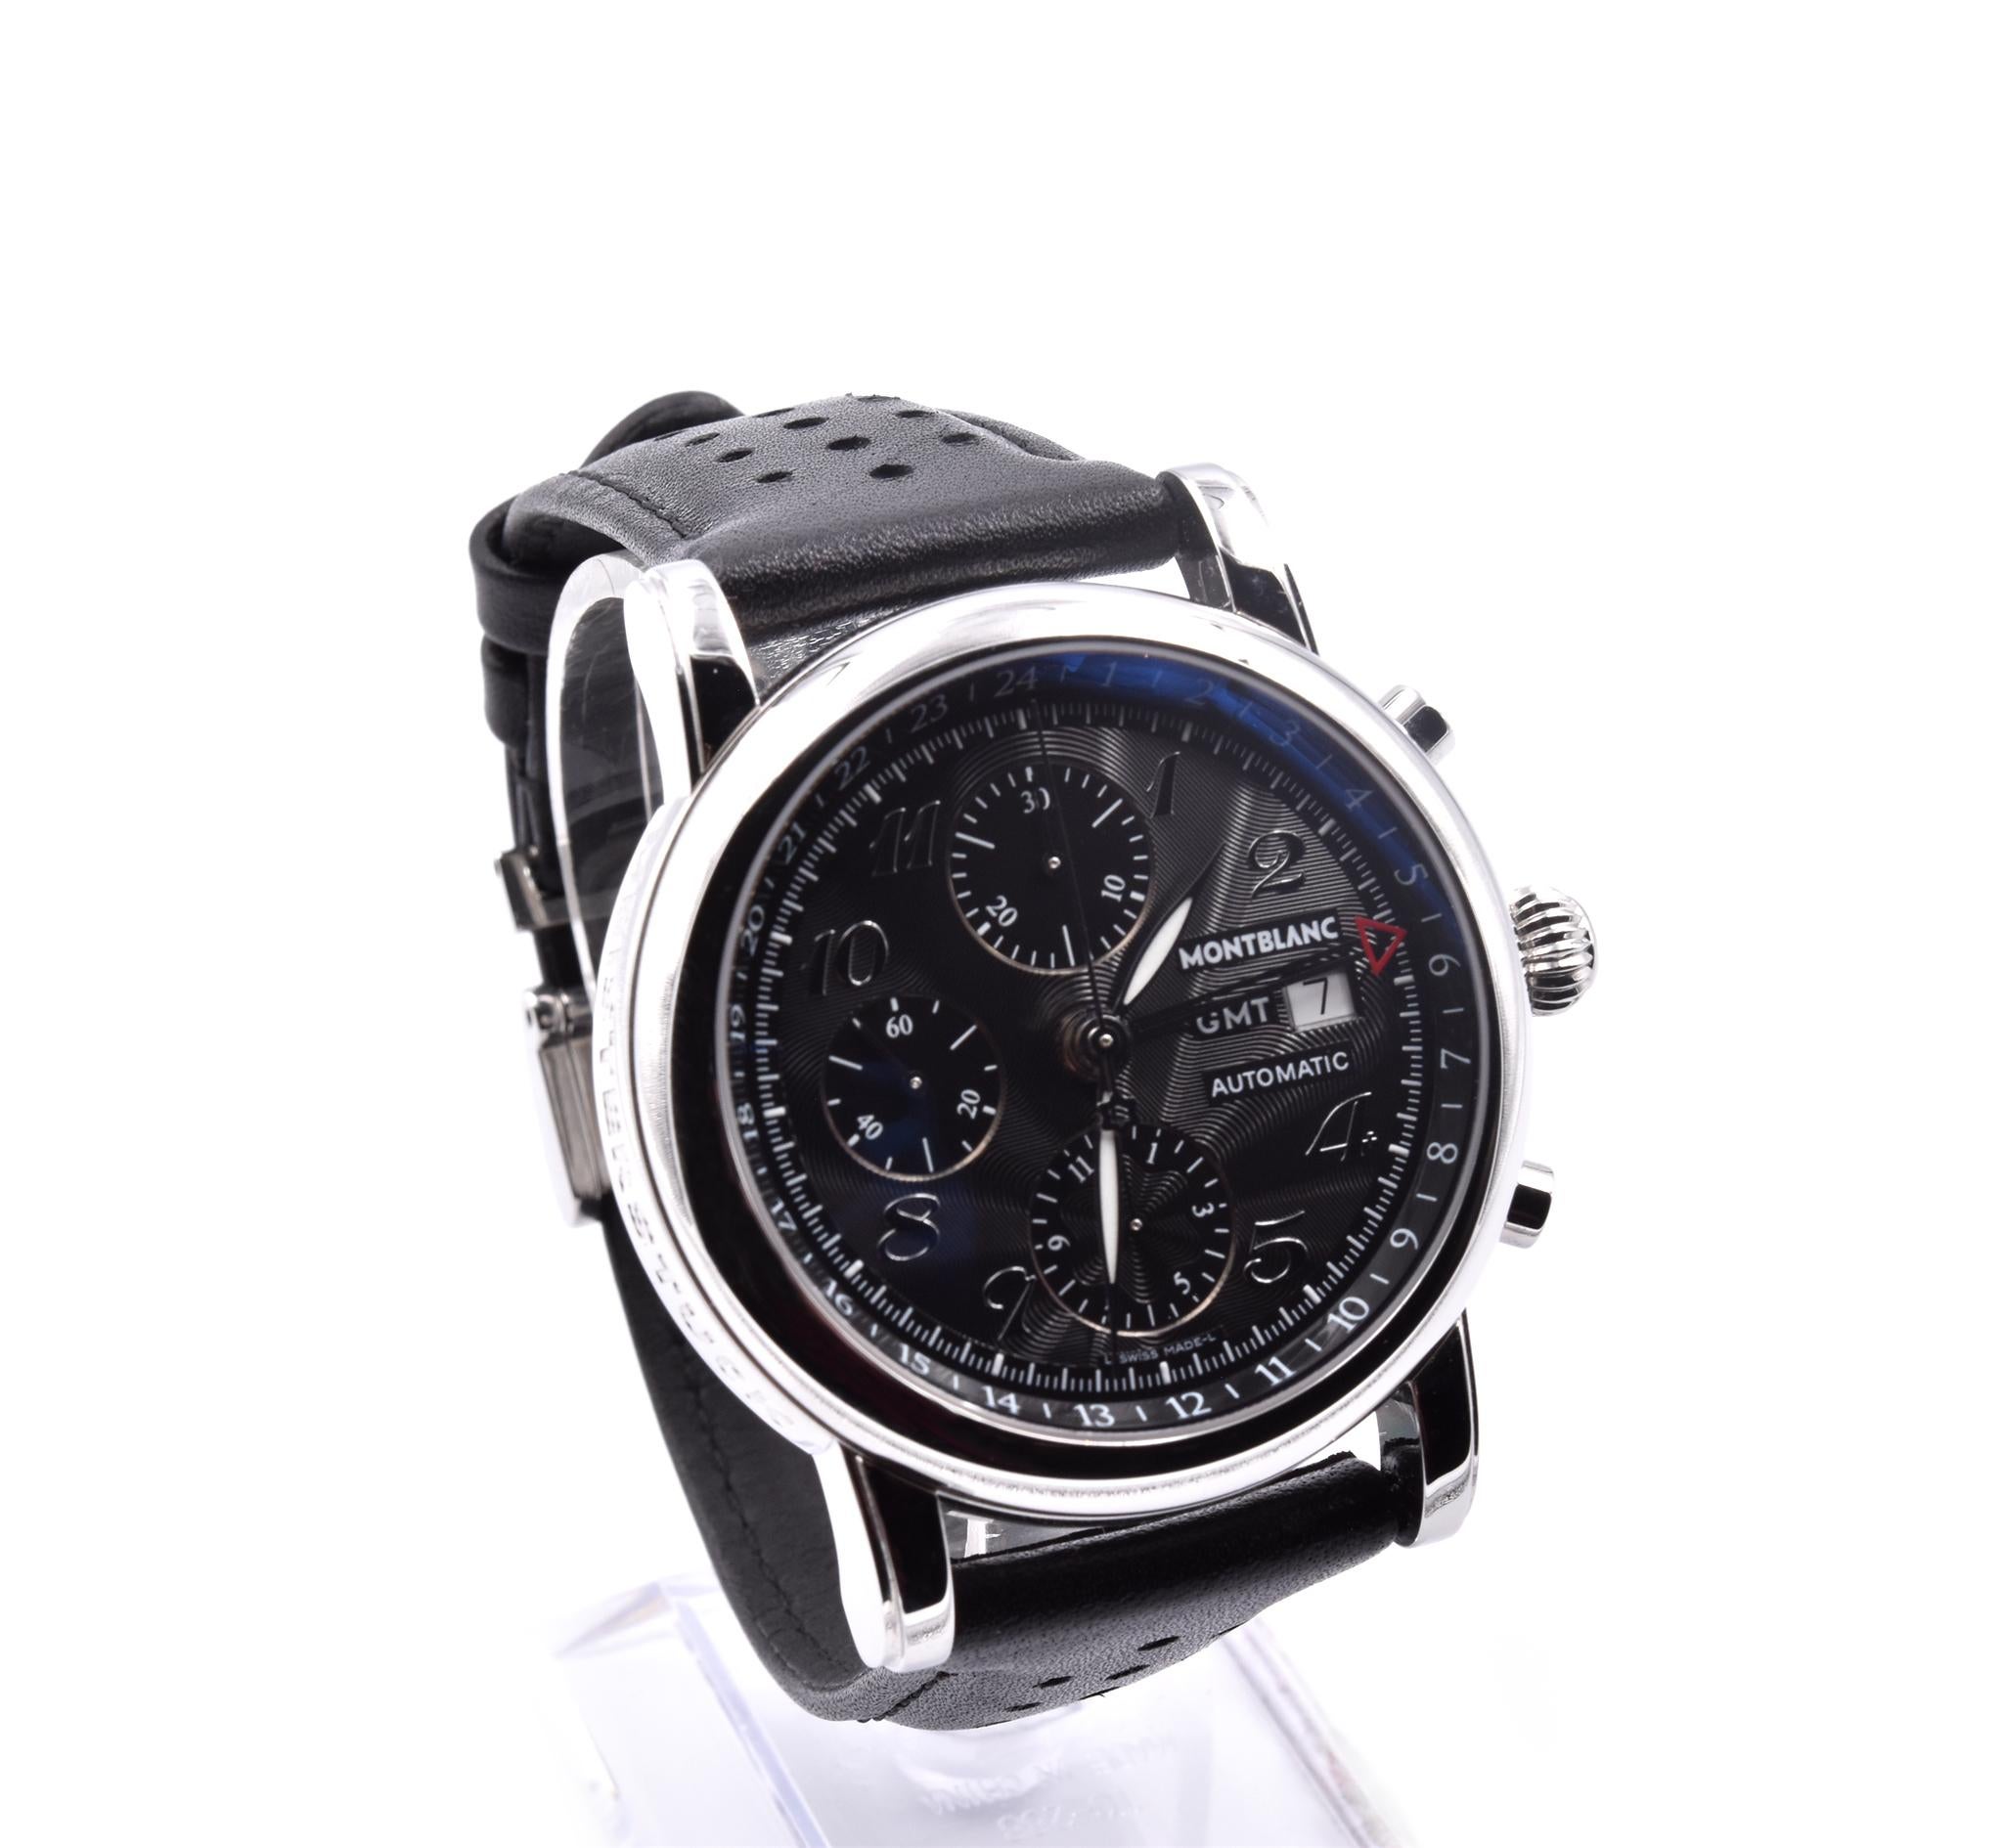 Movement: automatic
Function: hours, minutes, small seconds, date, chronograph, GMT
Case: 42mm stainless steel case, sapphire protective crystal, screw-down crown
Band: stainless steel bracelet with folding clasp
Dial: black chronograph dial, three